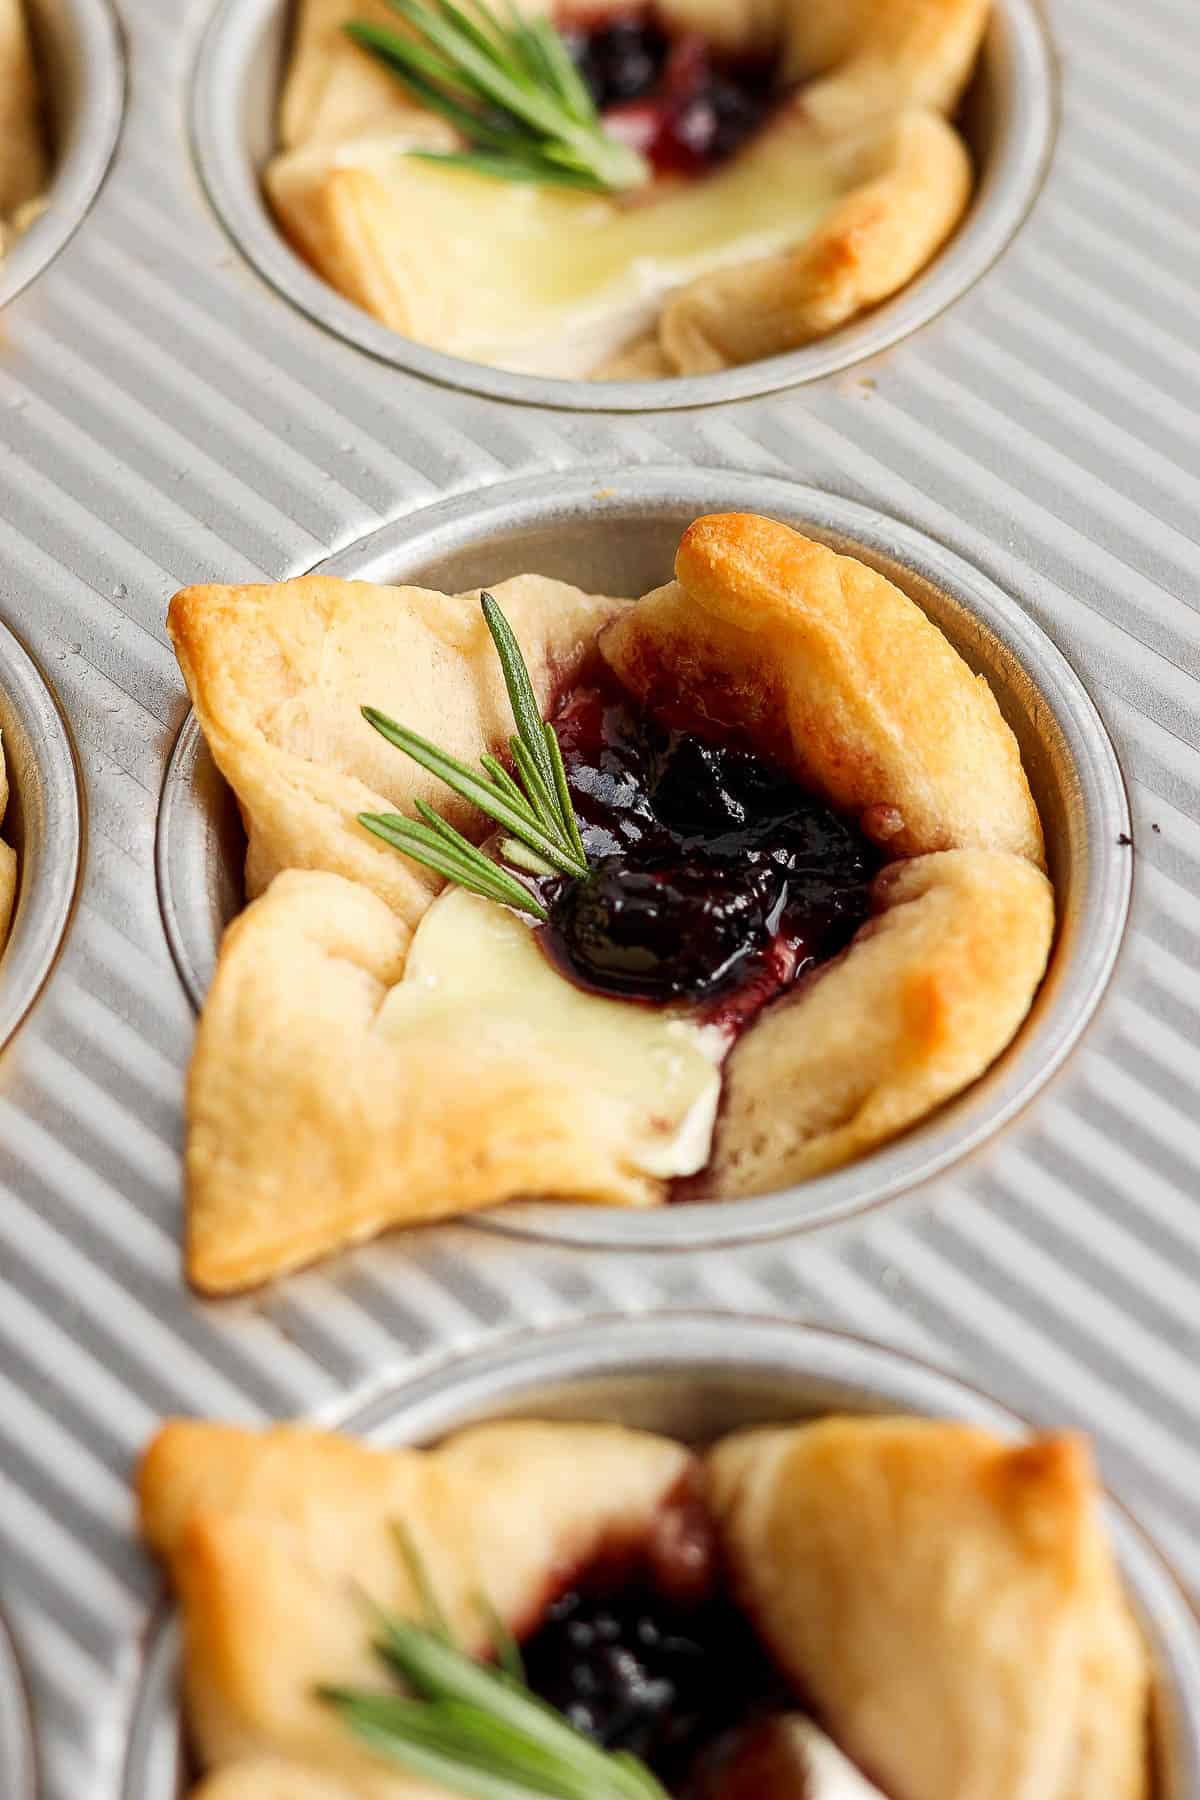 A close up of a baked brie bite with a sprig of rosemary on top.